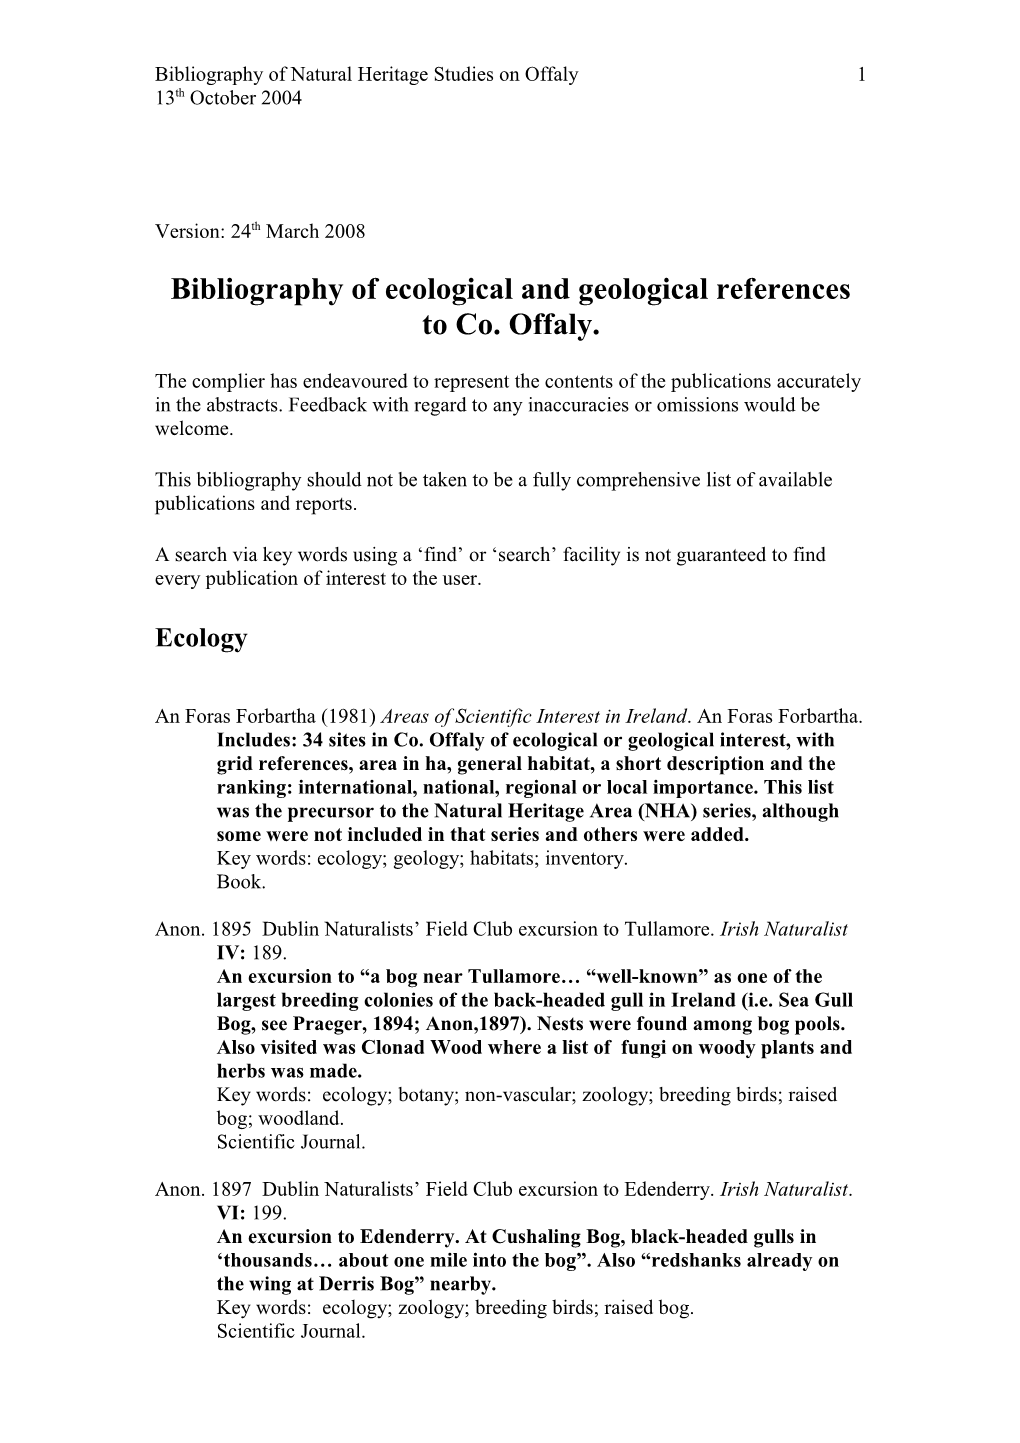 Bibliography of Ecological and Geological References to Co